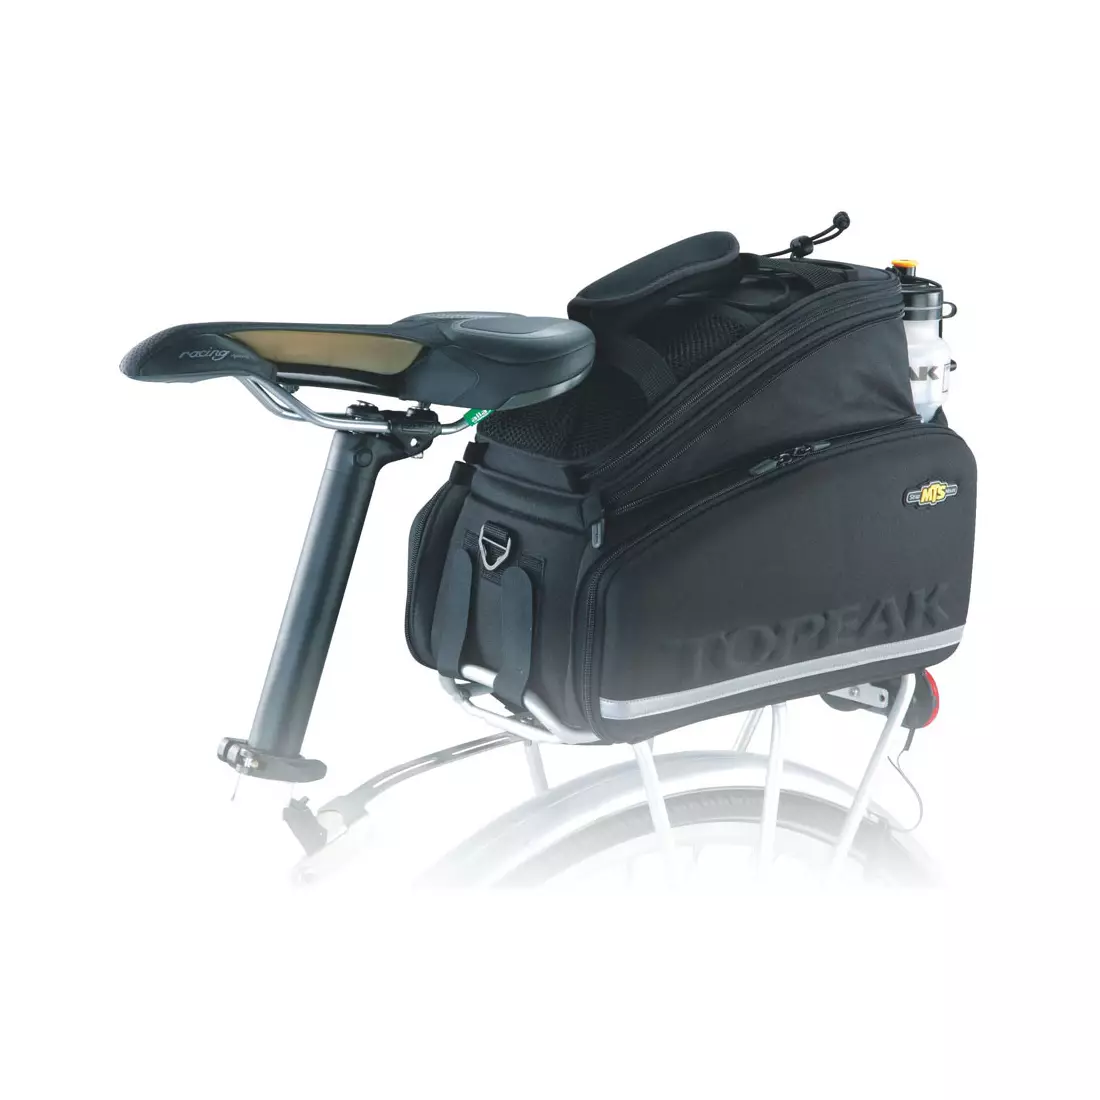 TOPEAK Bicycle bag for the trunk TRUNK BAG DXP STRAP (with sides - fastening straps) T-TT9643B